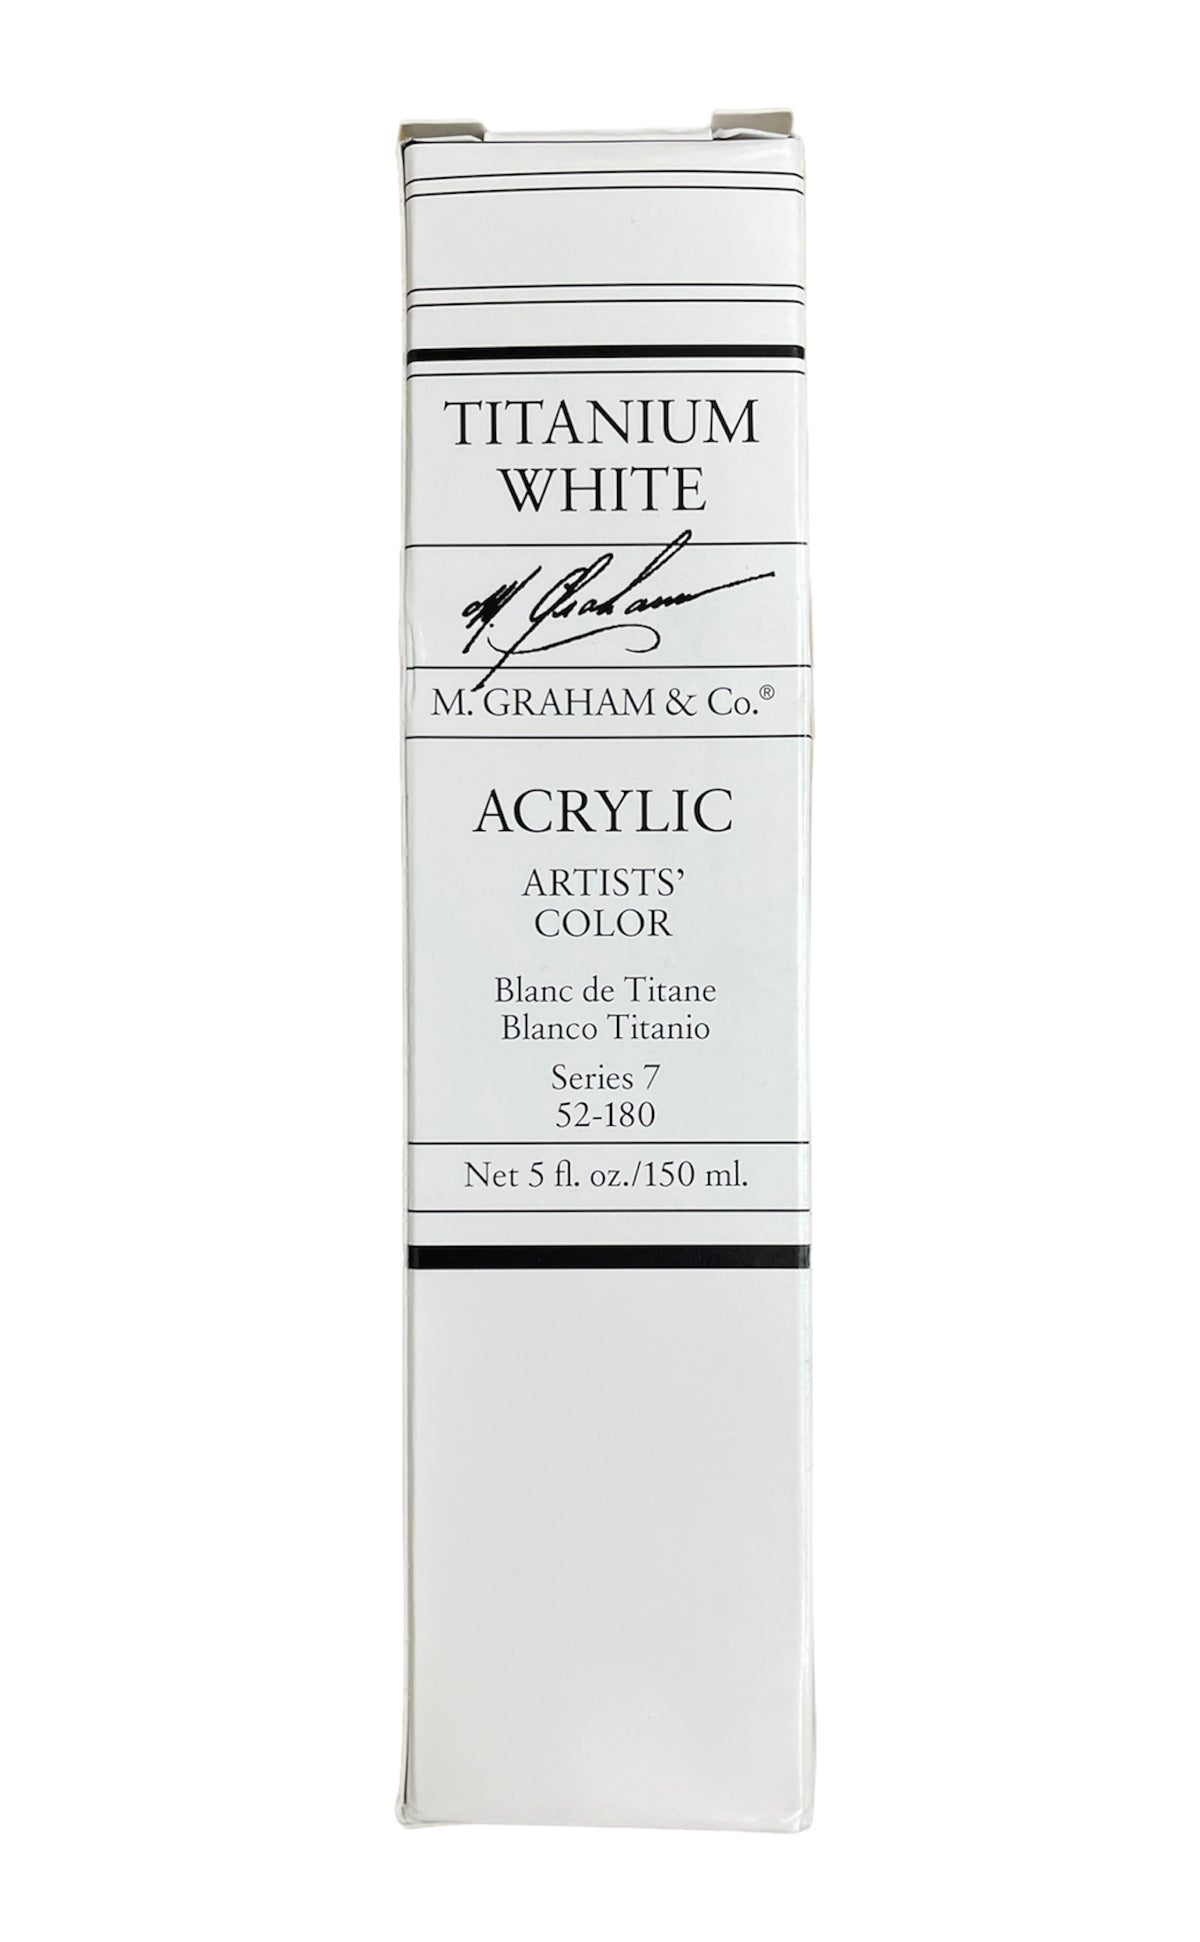 M. Graham Acrylic TITANIUM WHITE in 150ml. Available in Drawing Etc. Art Supplies store, Singapore